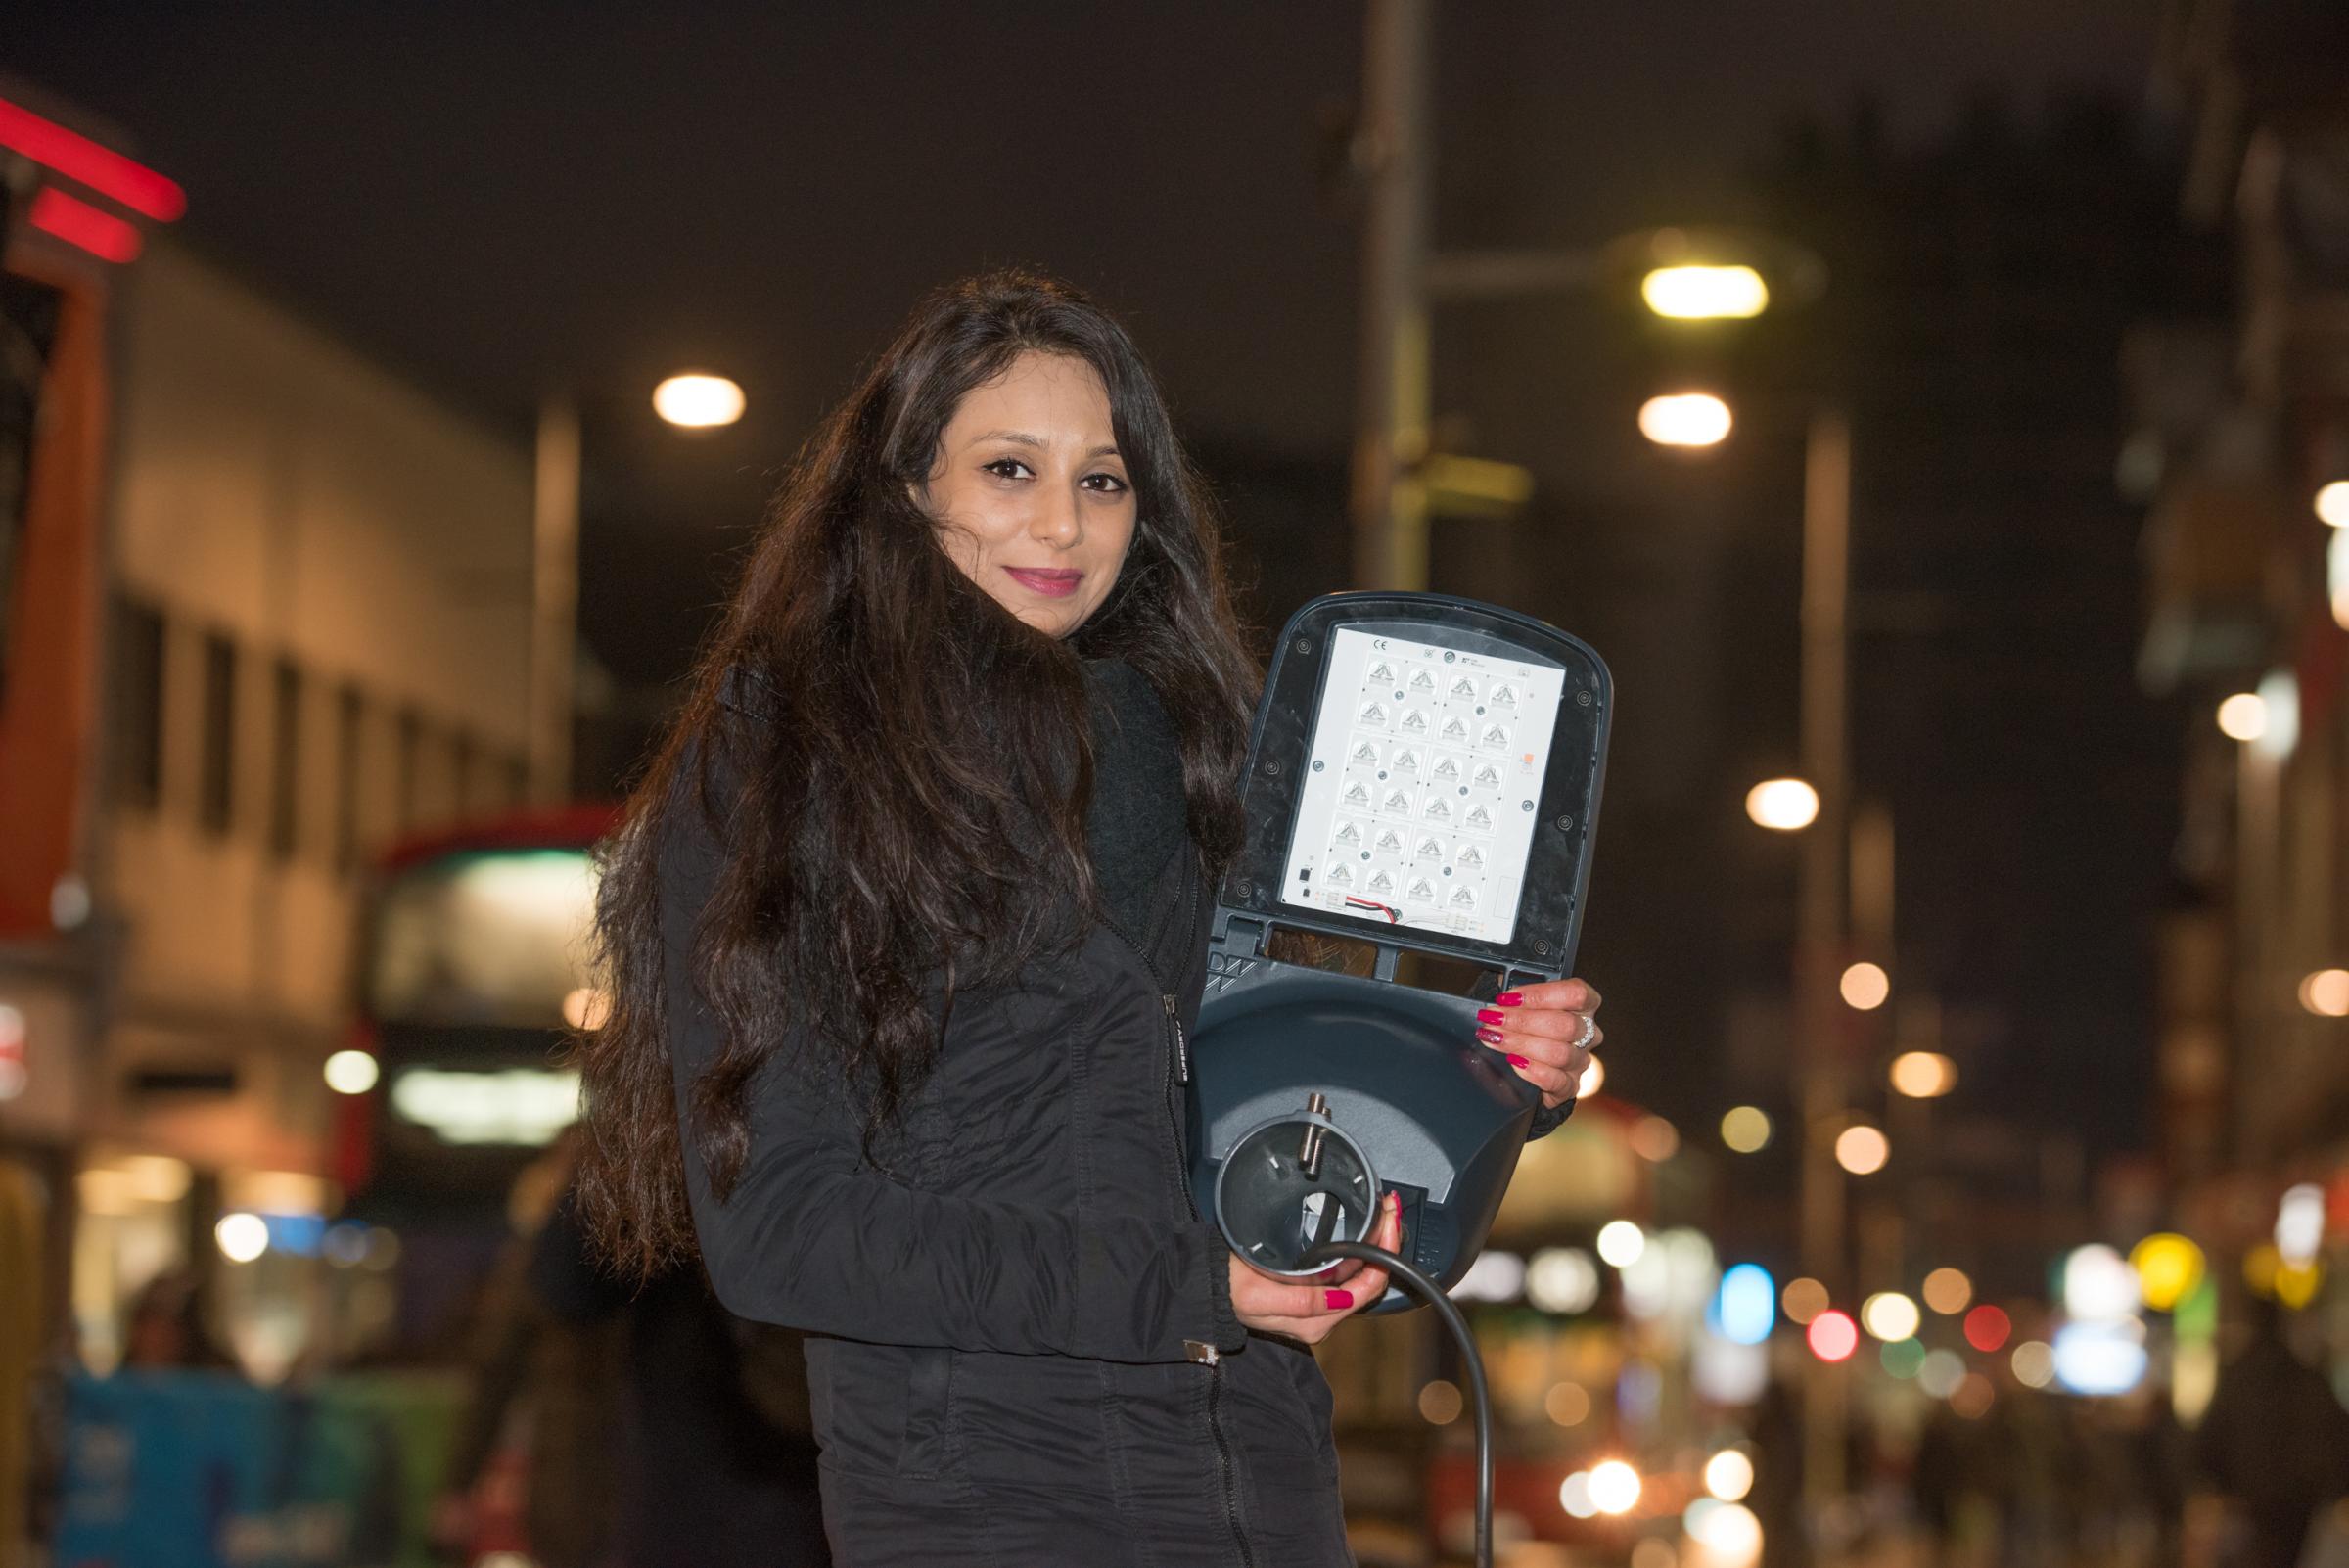 New streetlights could save councils millions – but not everyone is pleased